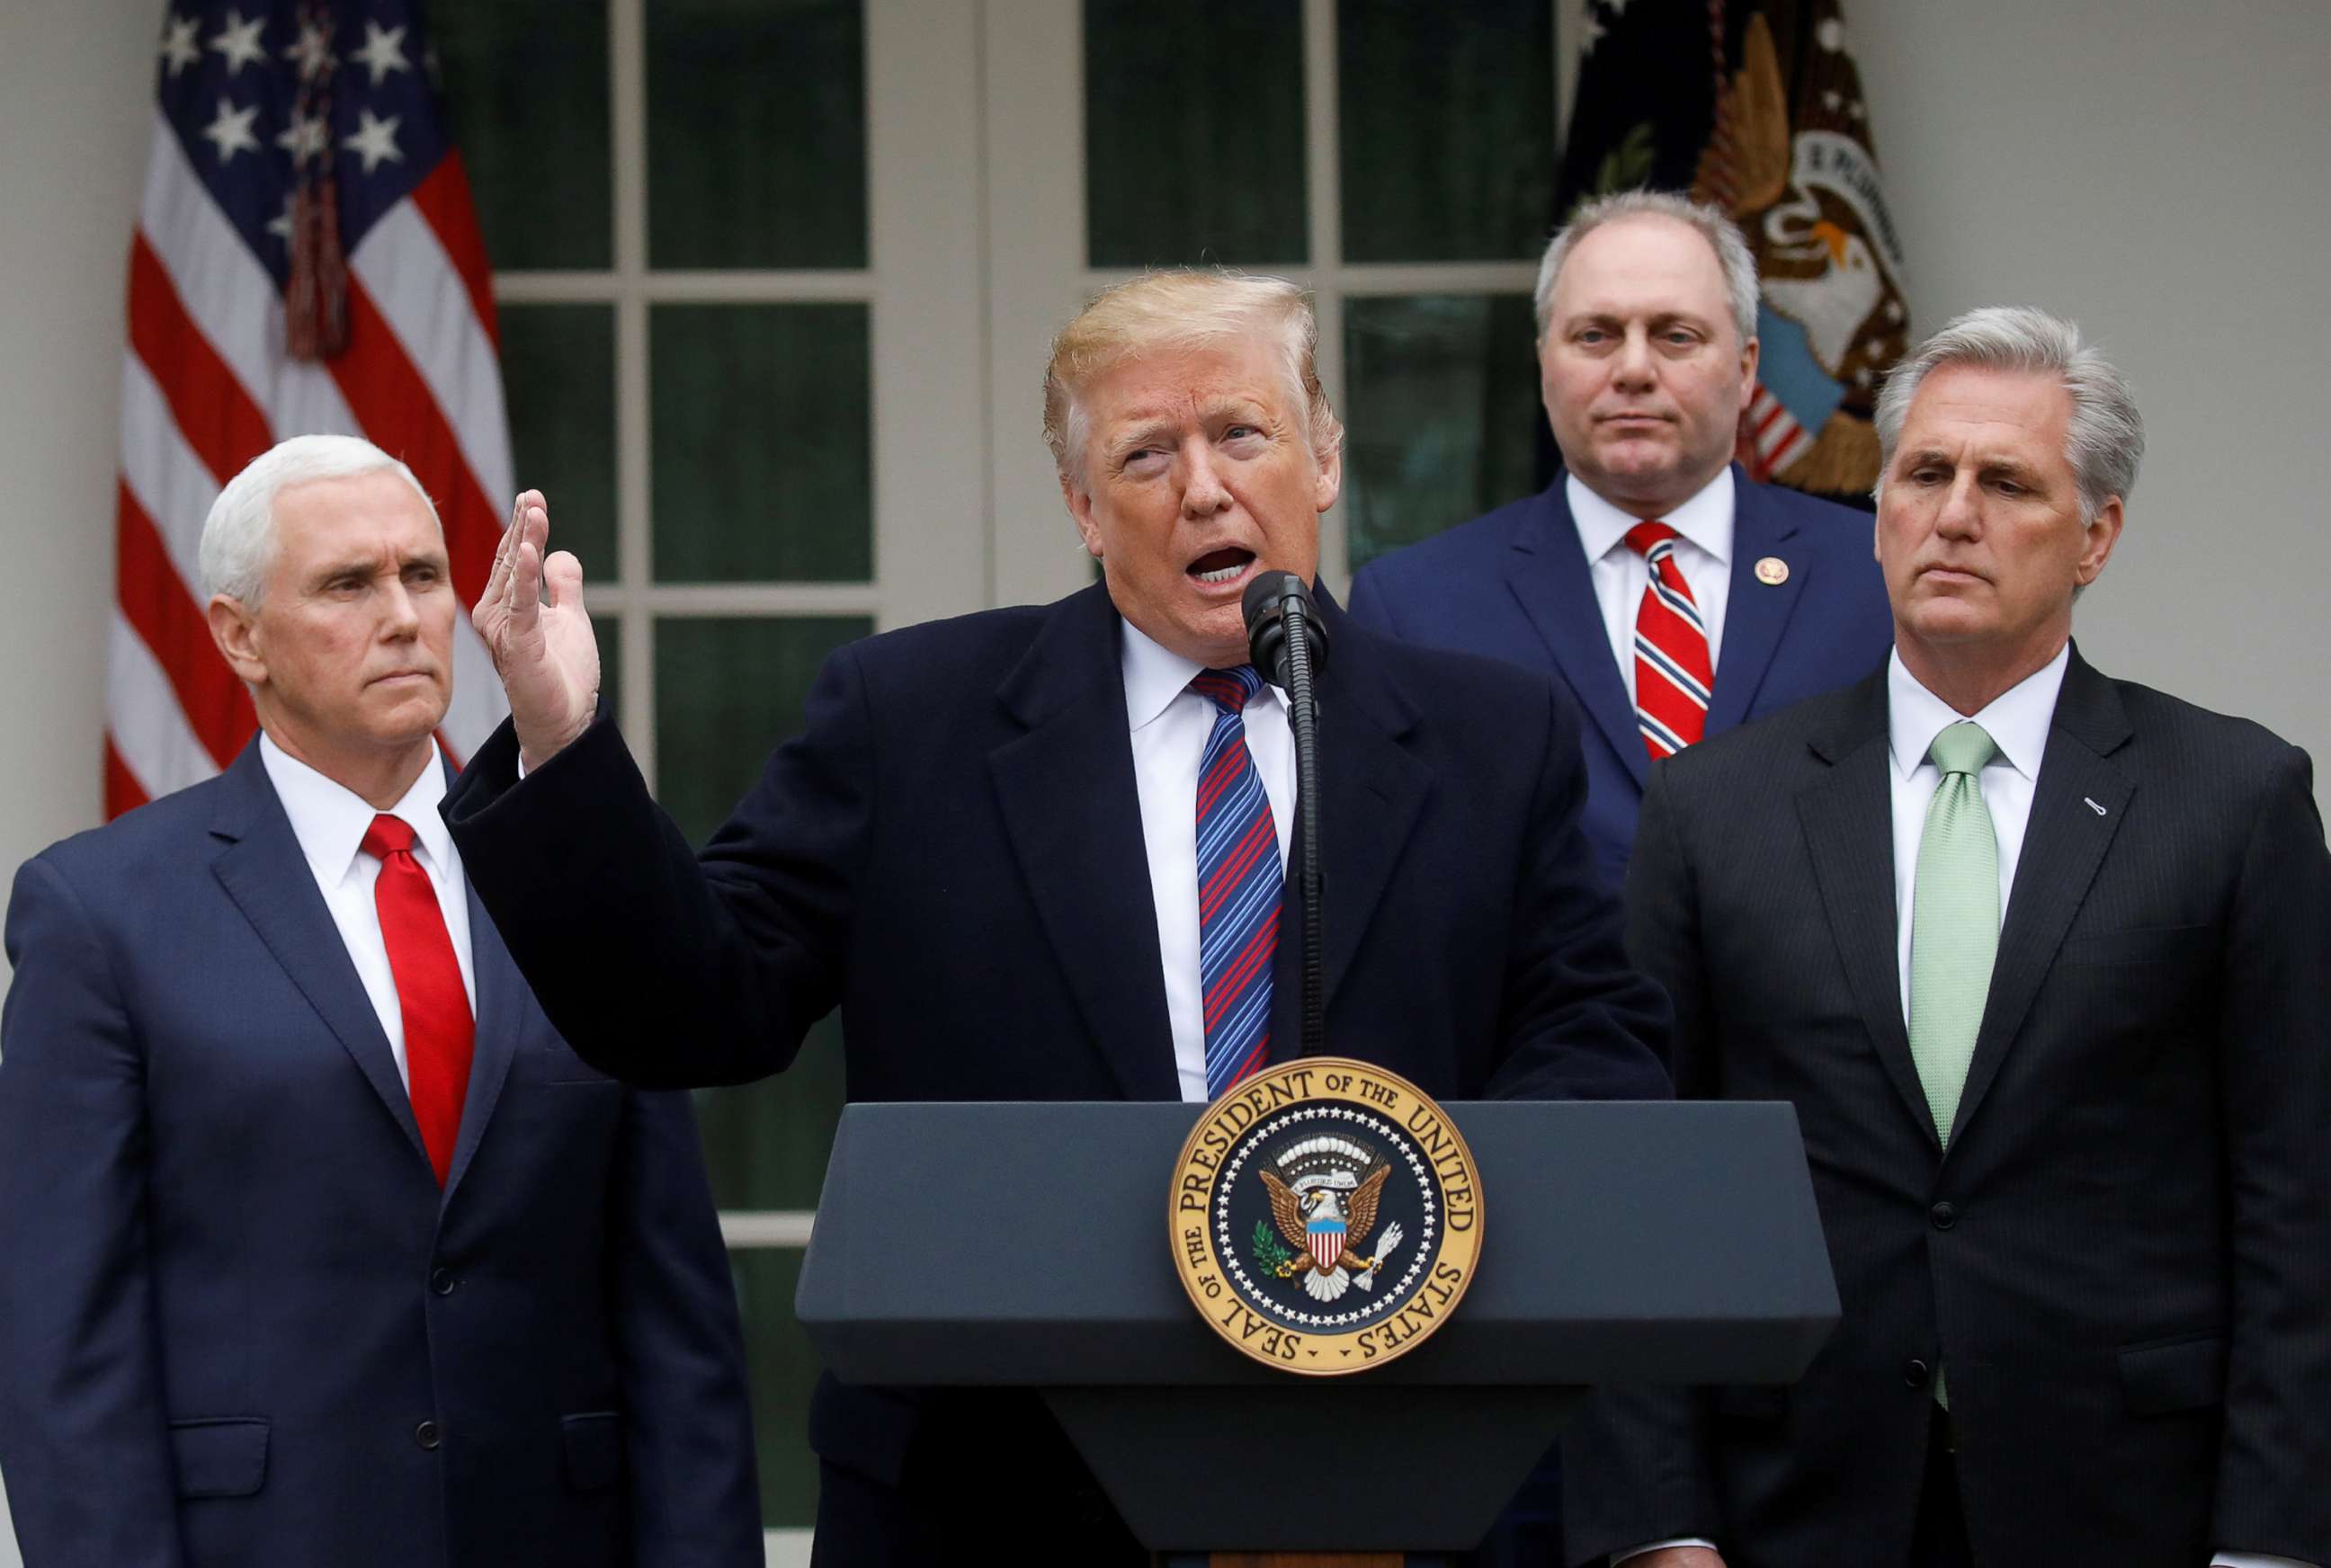 PHOTO: President Donald Trump speaks with reporters following a meeting with congressional leadership on the ongoing partial government shutdown in the Rose Garden of the White House in Washington, Jan. 4, 2019.